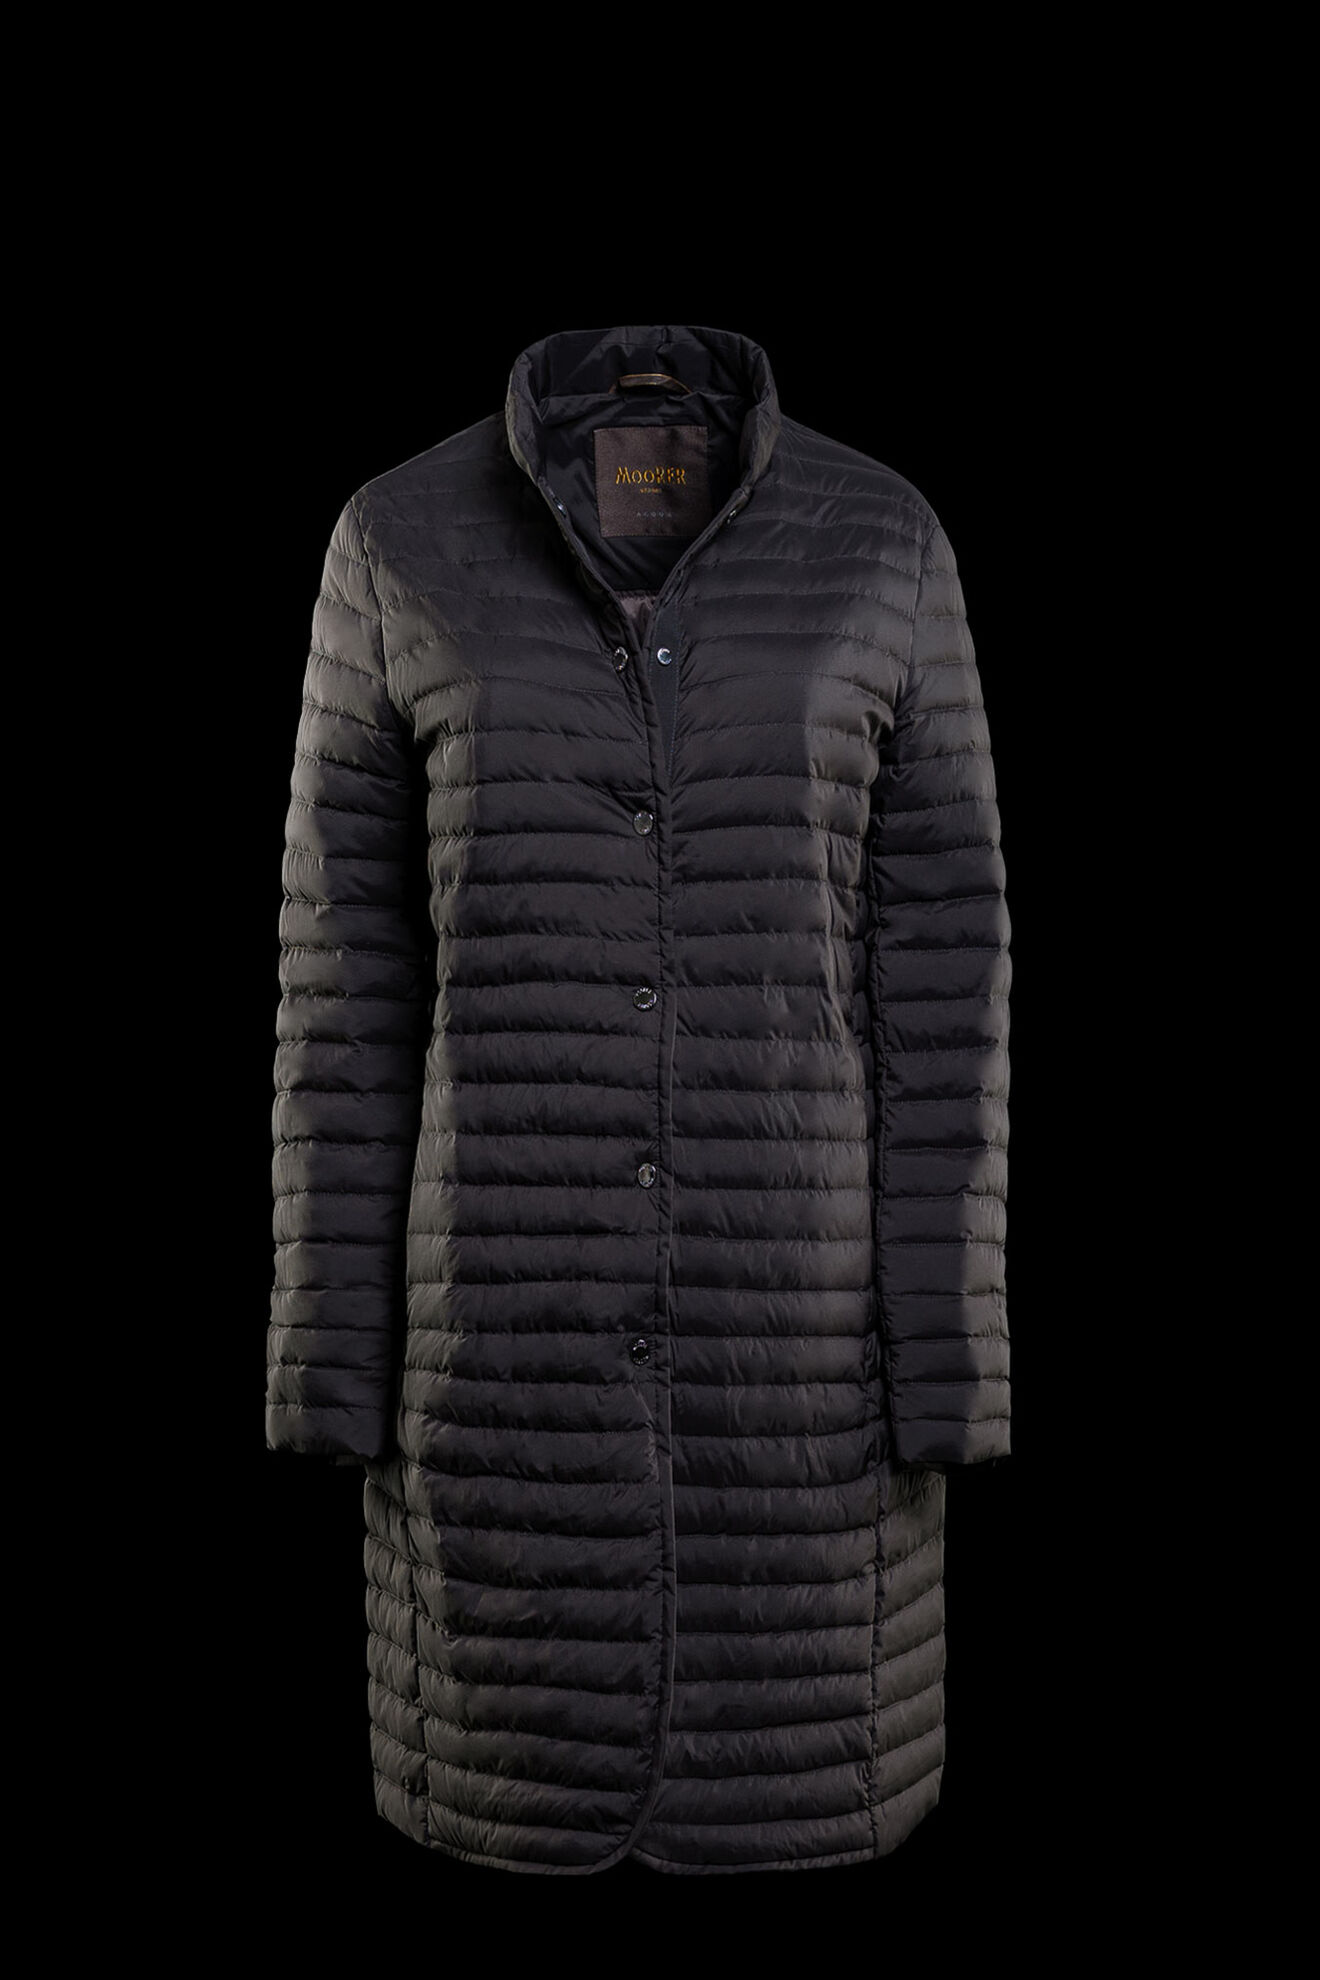 Unlock Wilderness' choice in the MooRER Vs Moncler comparison, the LEA-S3 by MooRER